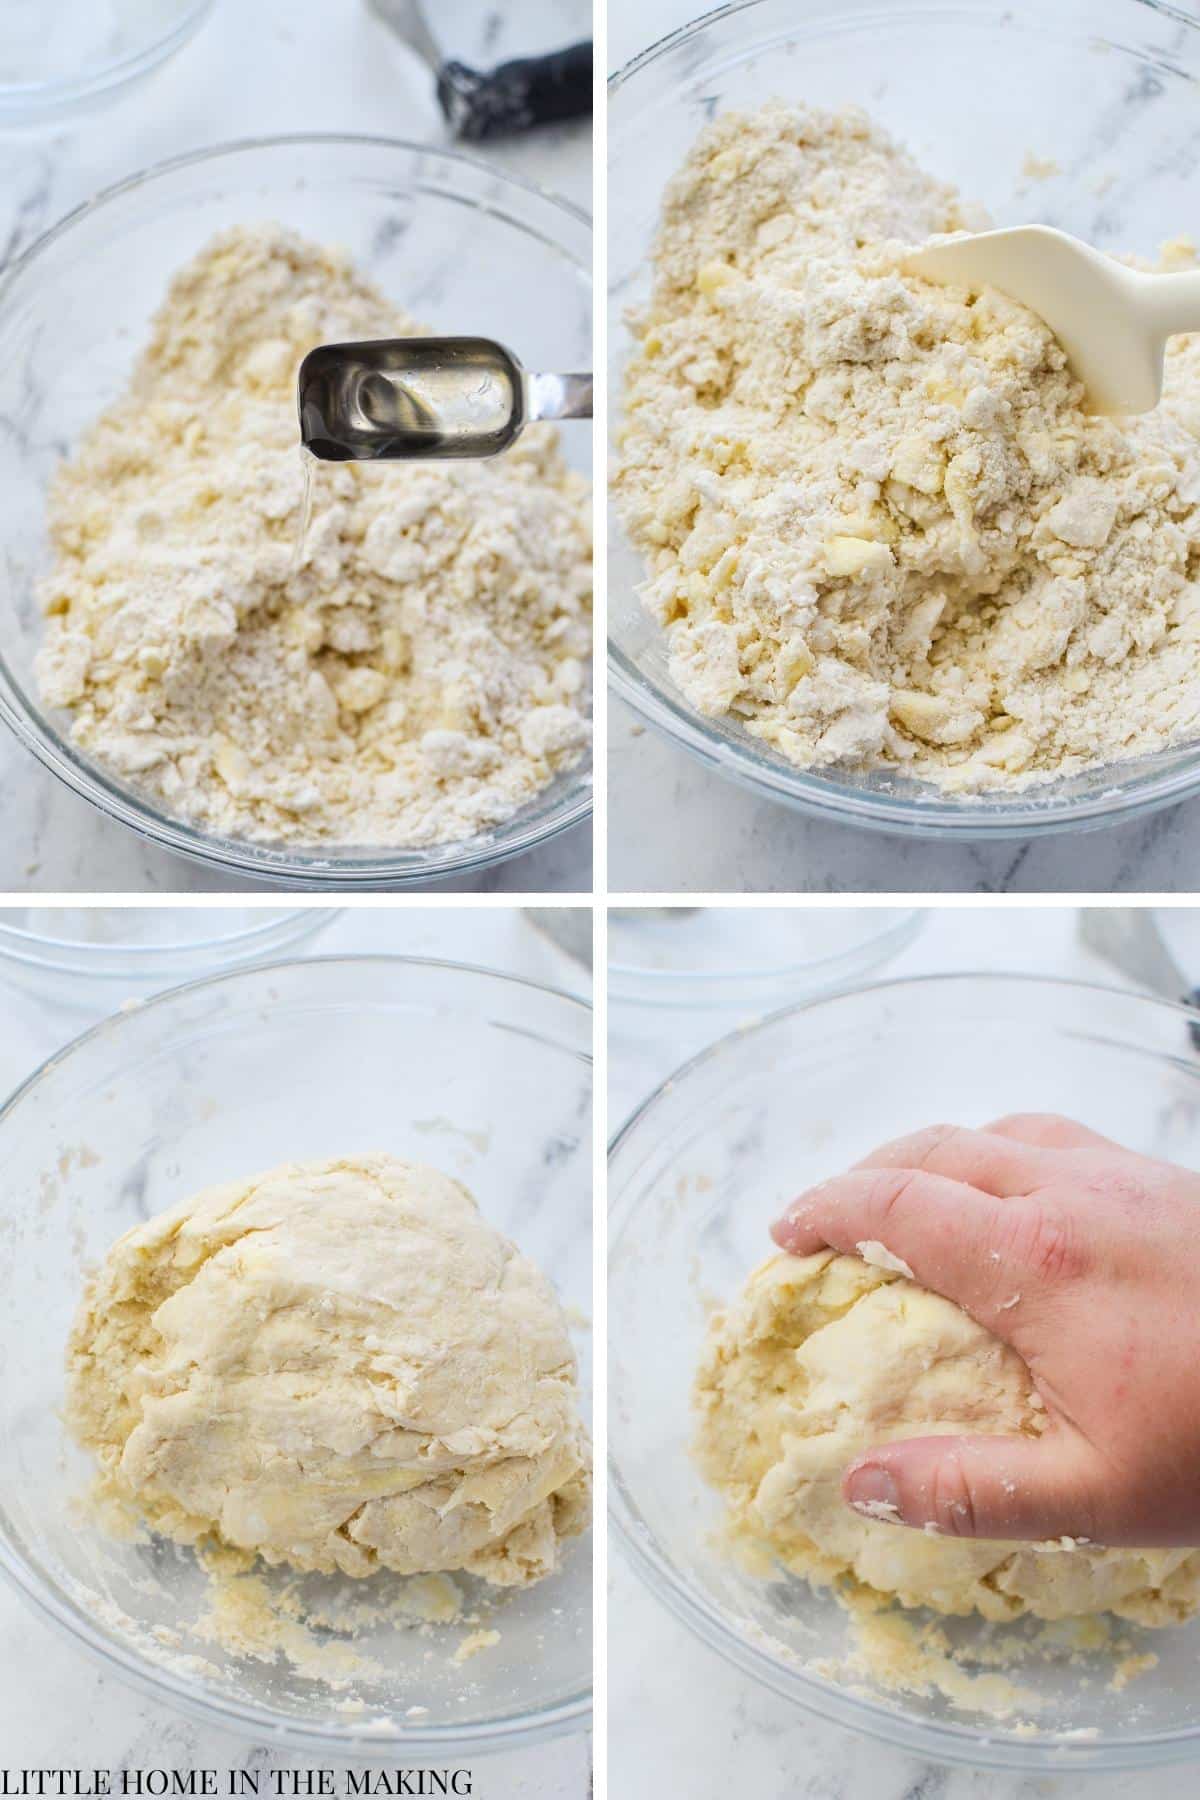 Adding water to form a pie dough.